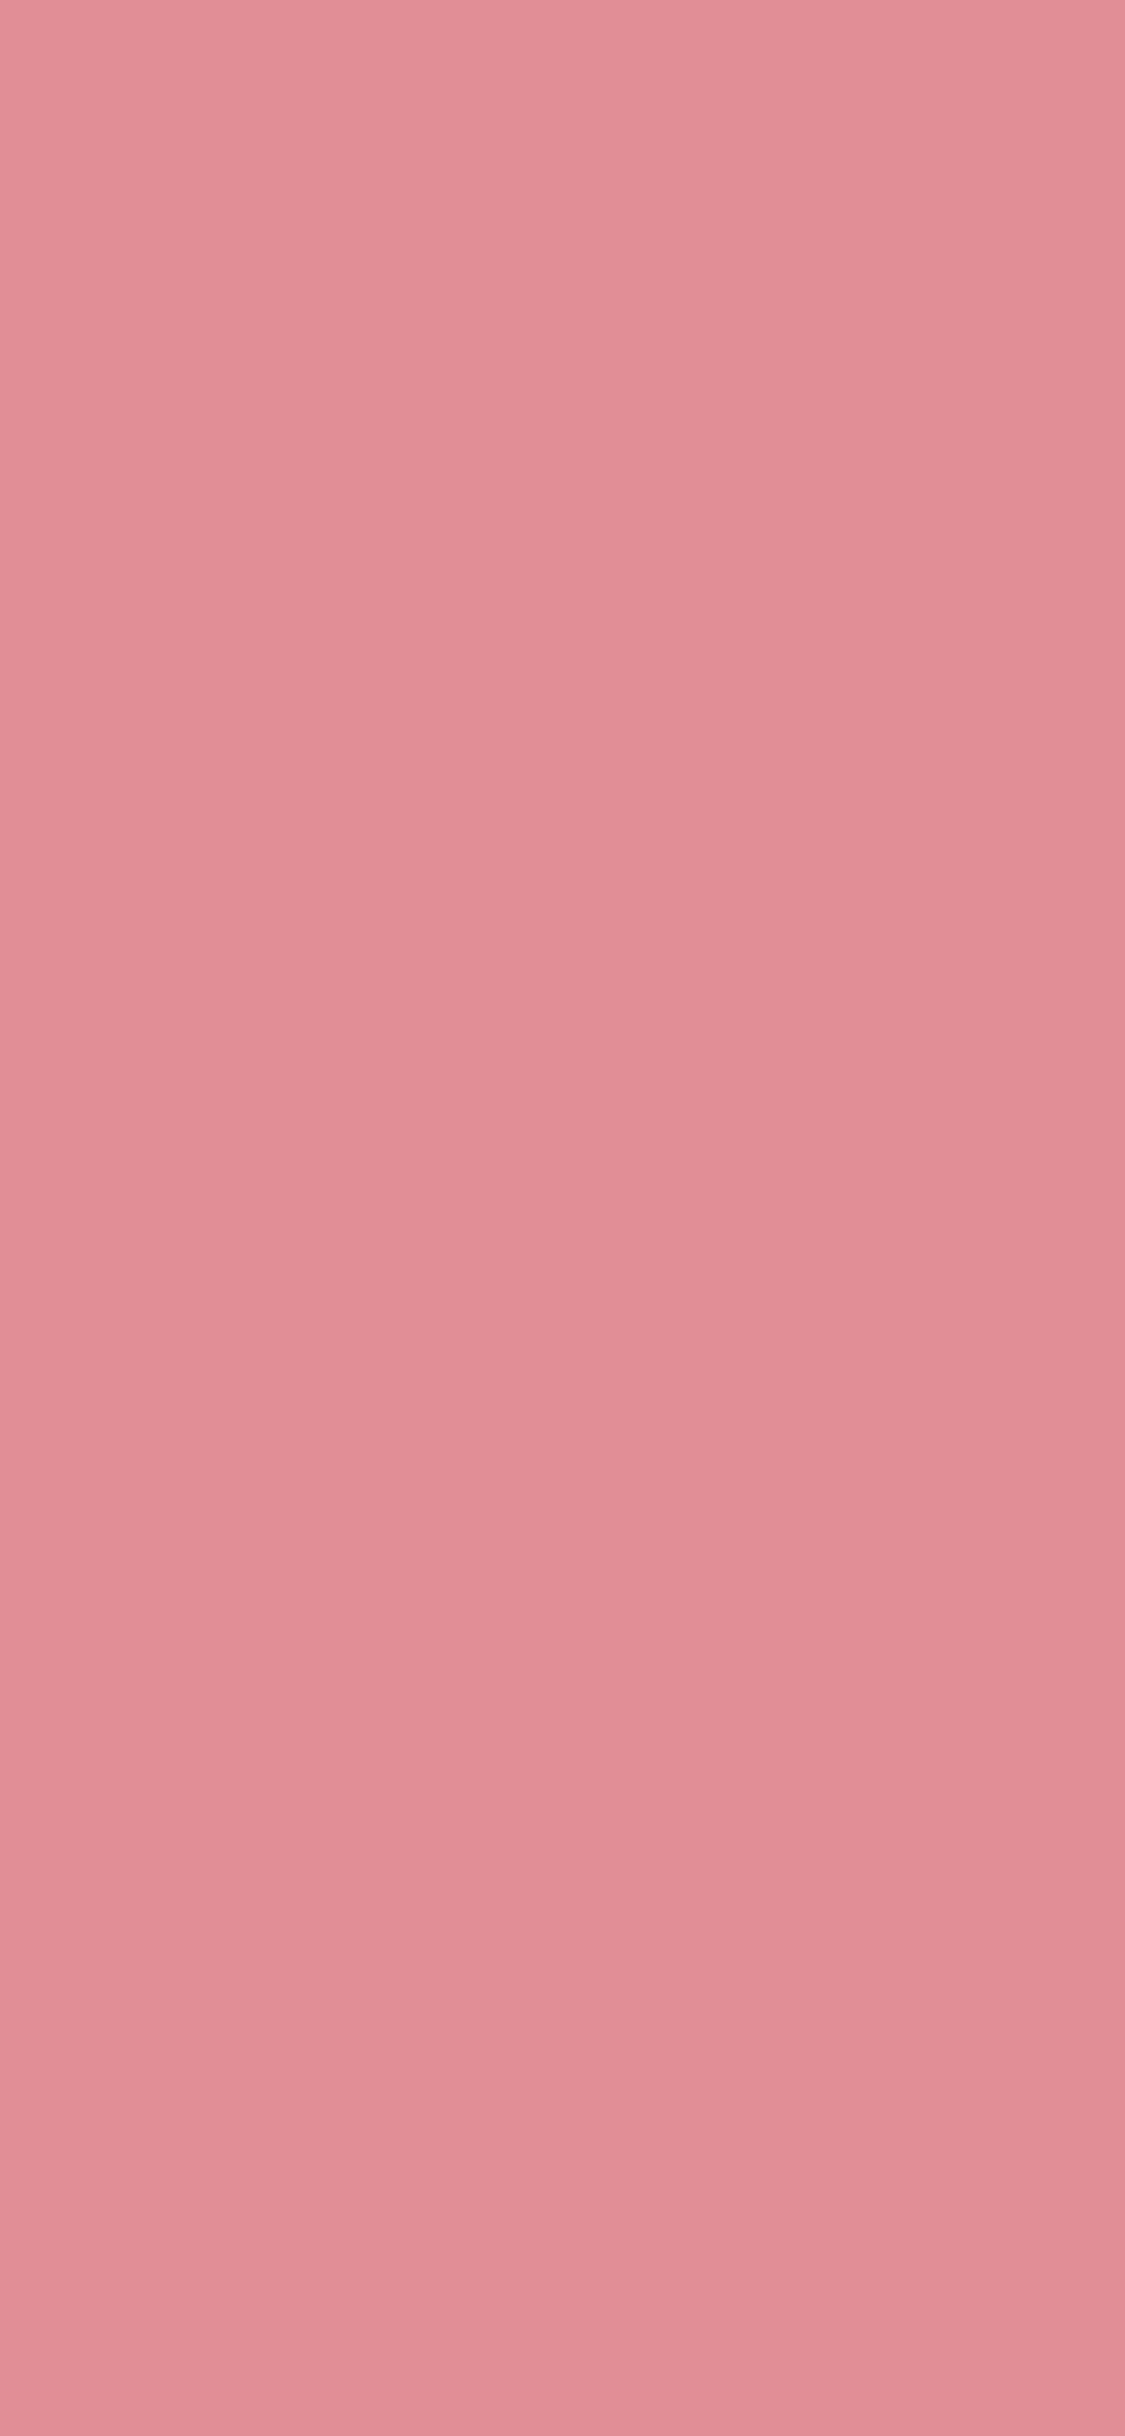 1125x2436 Ruddy Pink Solid Color Background